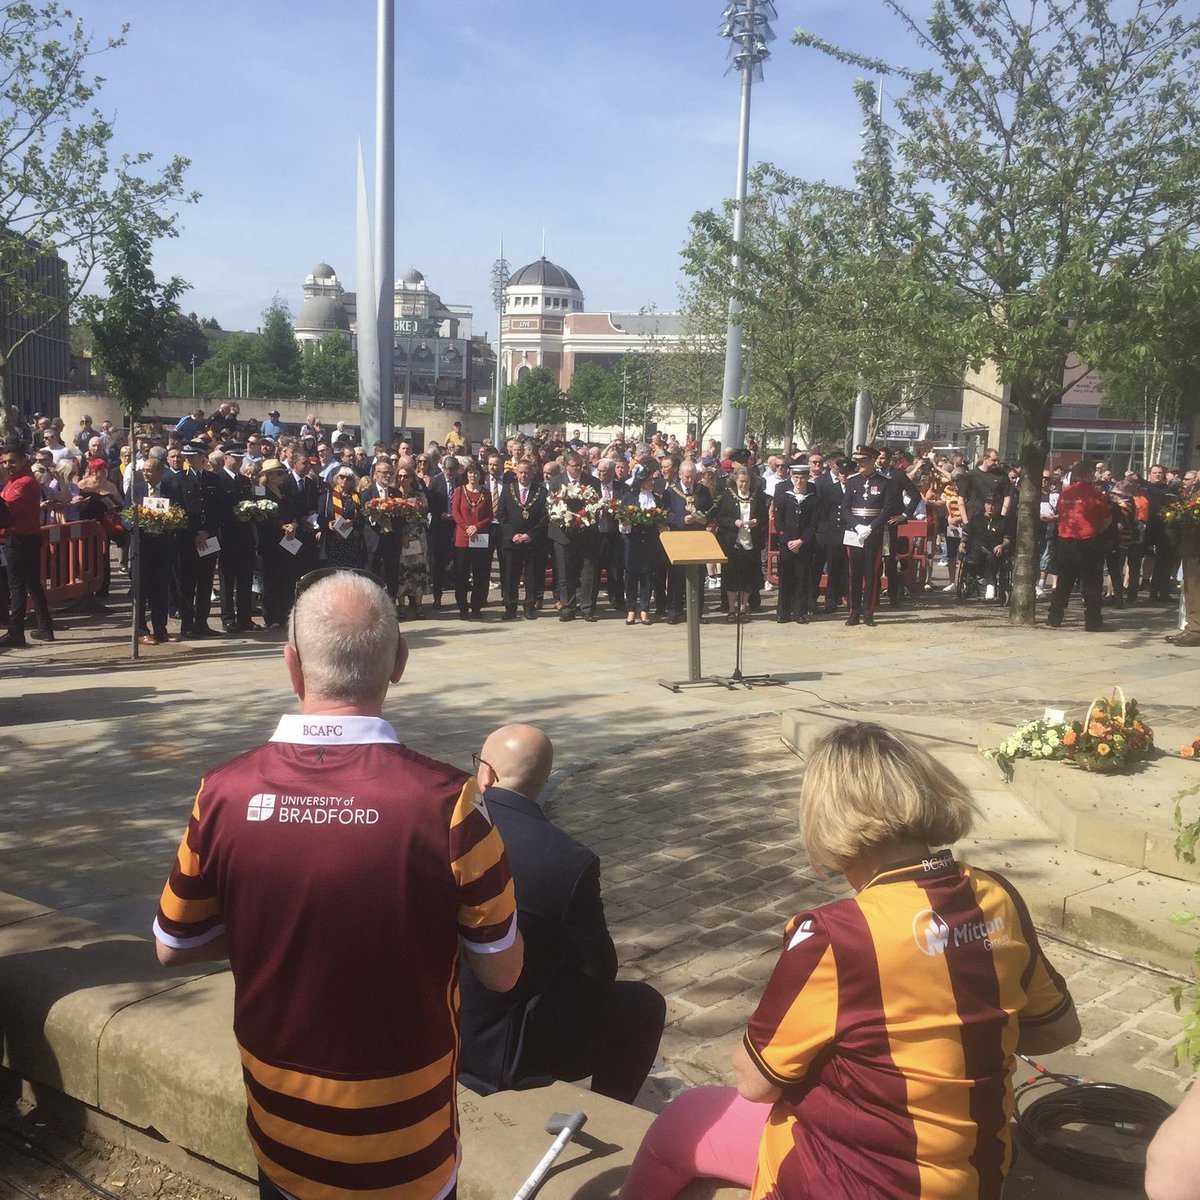 LIVE ON-AIR NOW The annual Bradford City Fire Memorial Service with June Russell and John Brennan Live on 106.6FM and online via bcbradio.co.uk/player